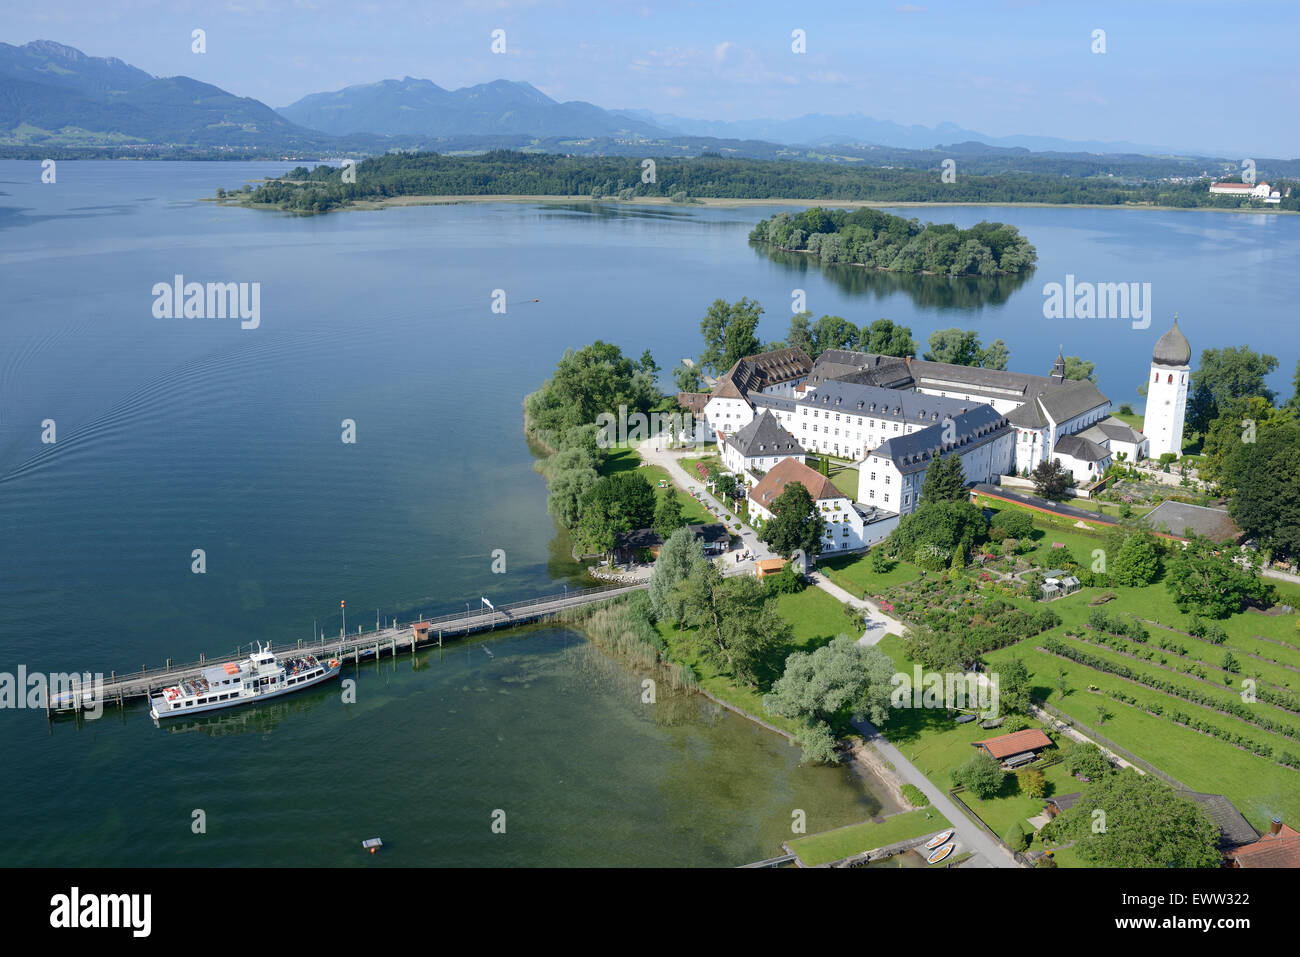 AERIAL VIEW. Benedictine Abbey of Frauenwörth on Frauenchiemsee (also known as Fraueninsel) island. Lake Chiemsee, Bavaria, Germany. Stock Photo